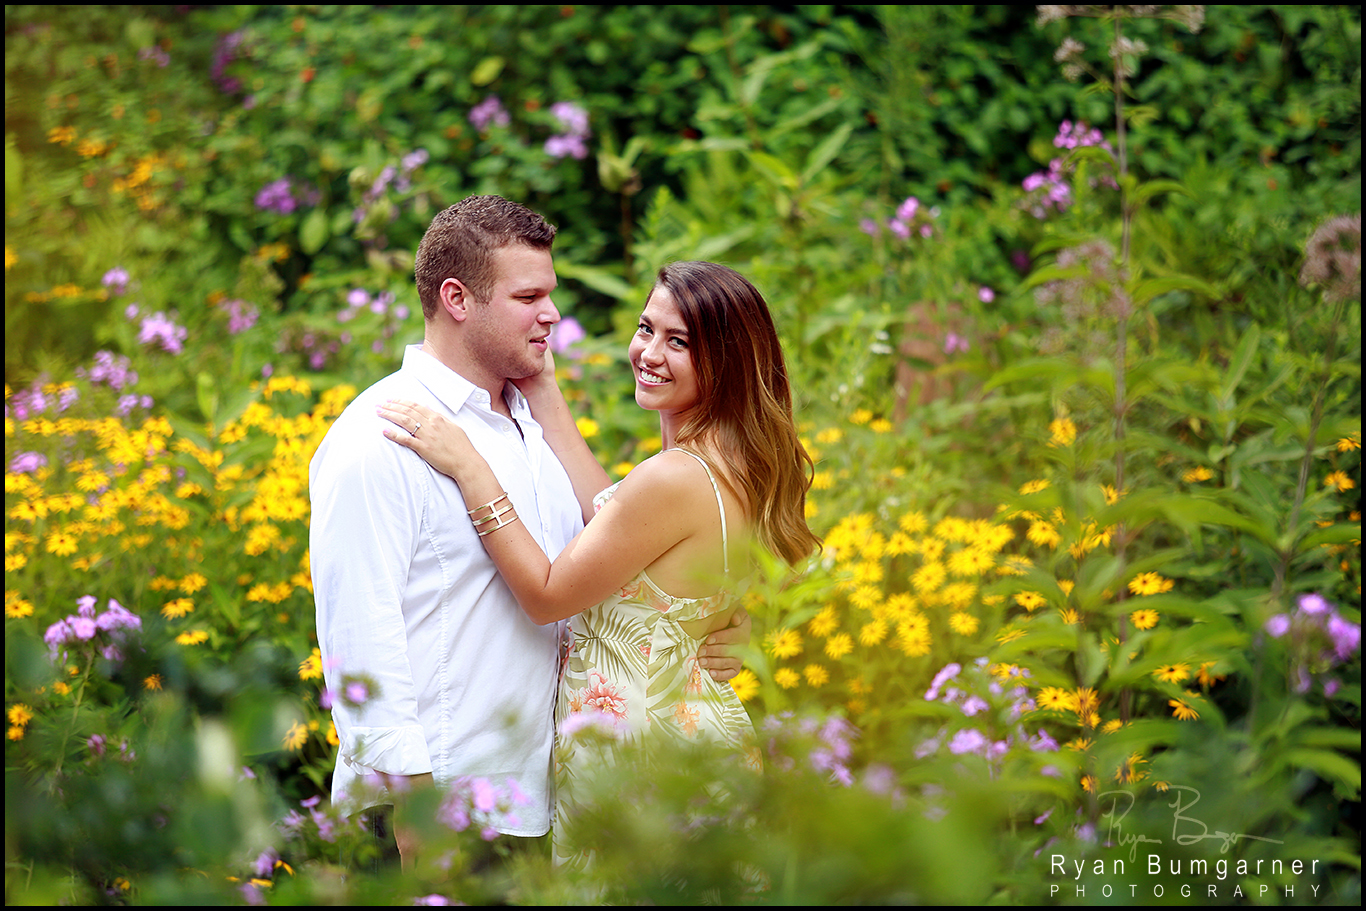 Engagement And Couples Portrait Sessions Now Available